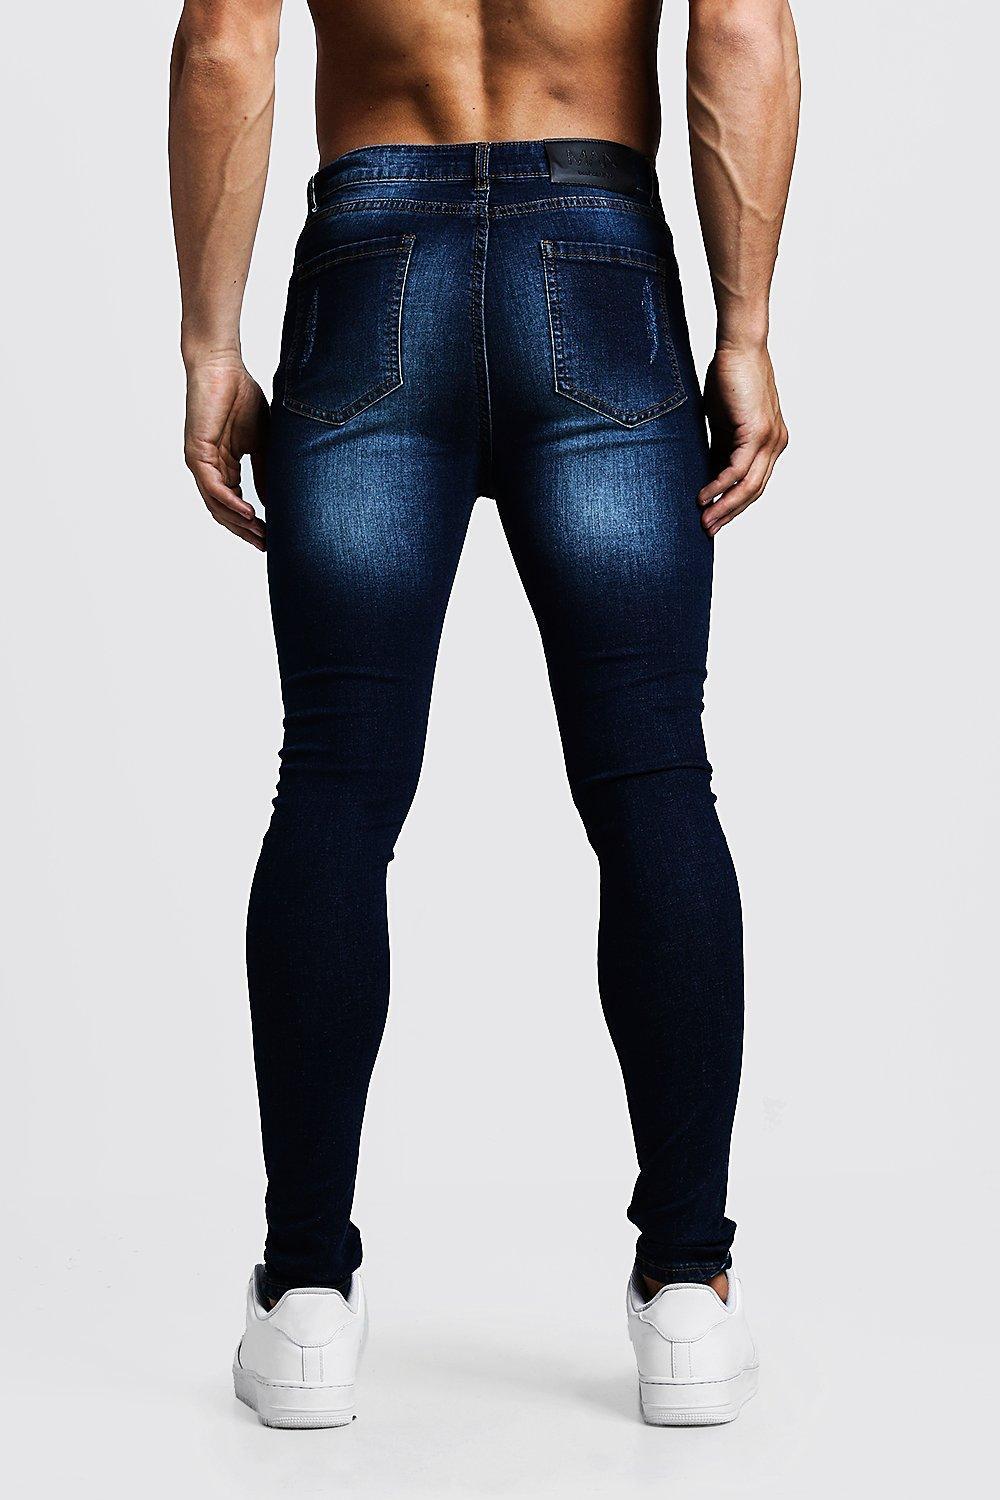 BoohooMAN Super Skinny Jeans With All Over Rips in Blue for Men - Lyst